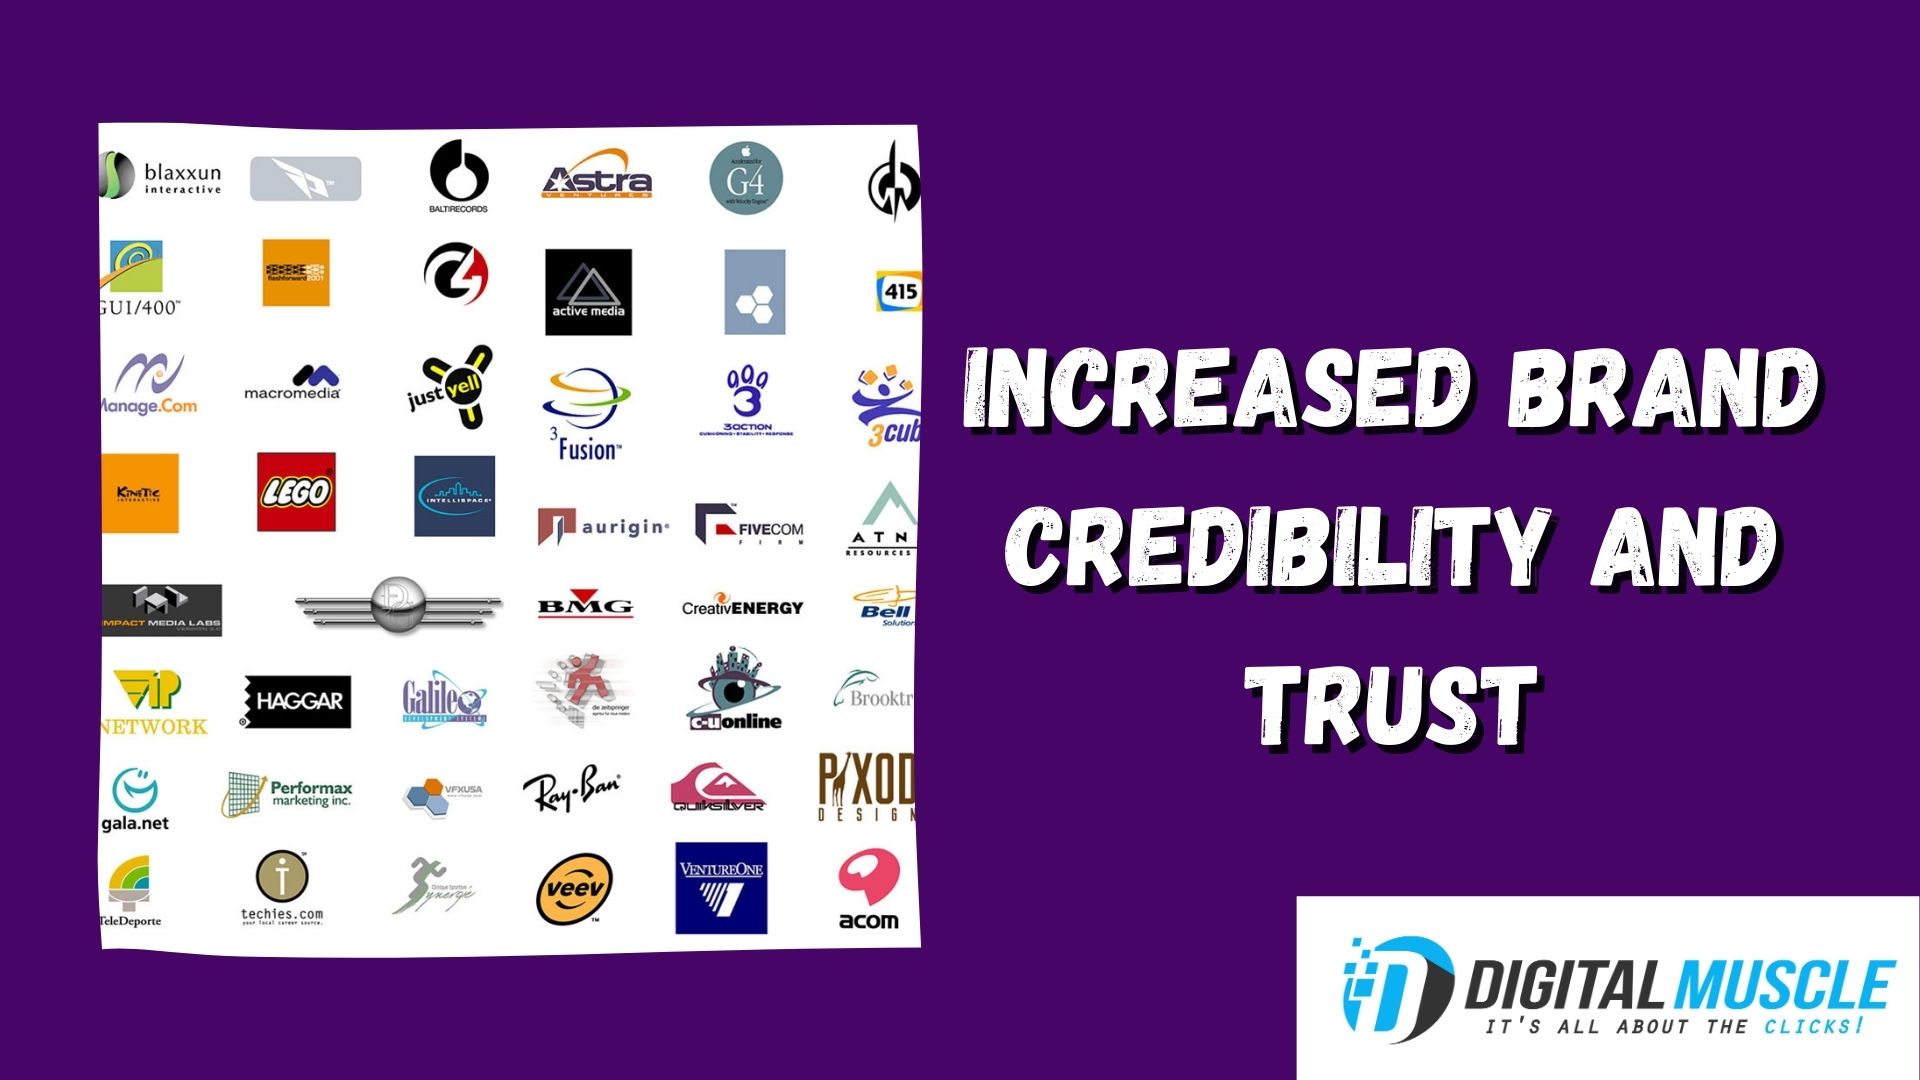 Increased brand trust and credibility